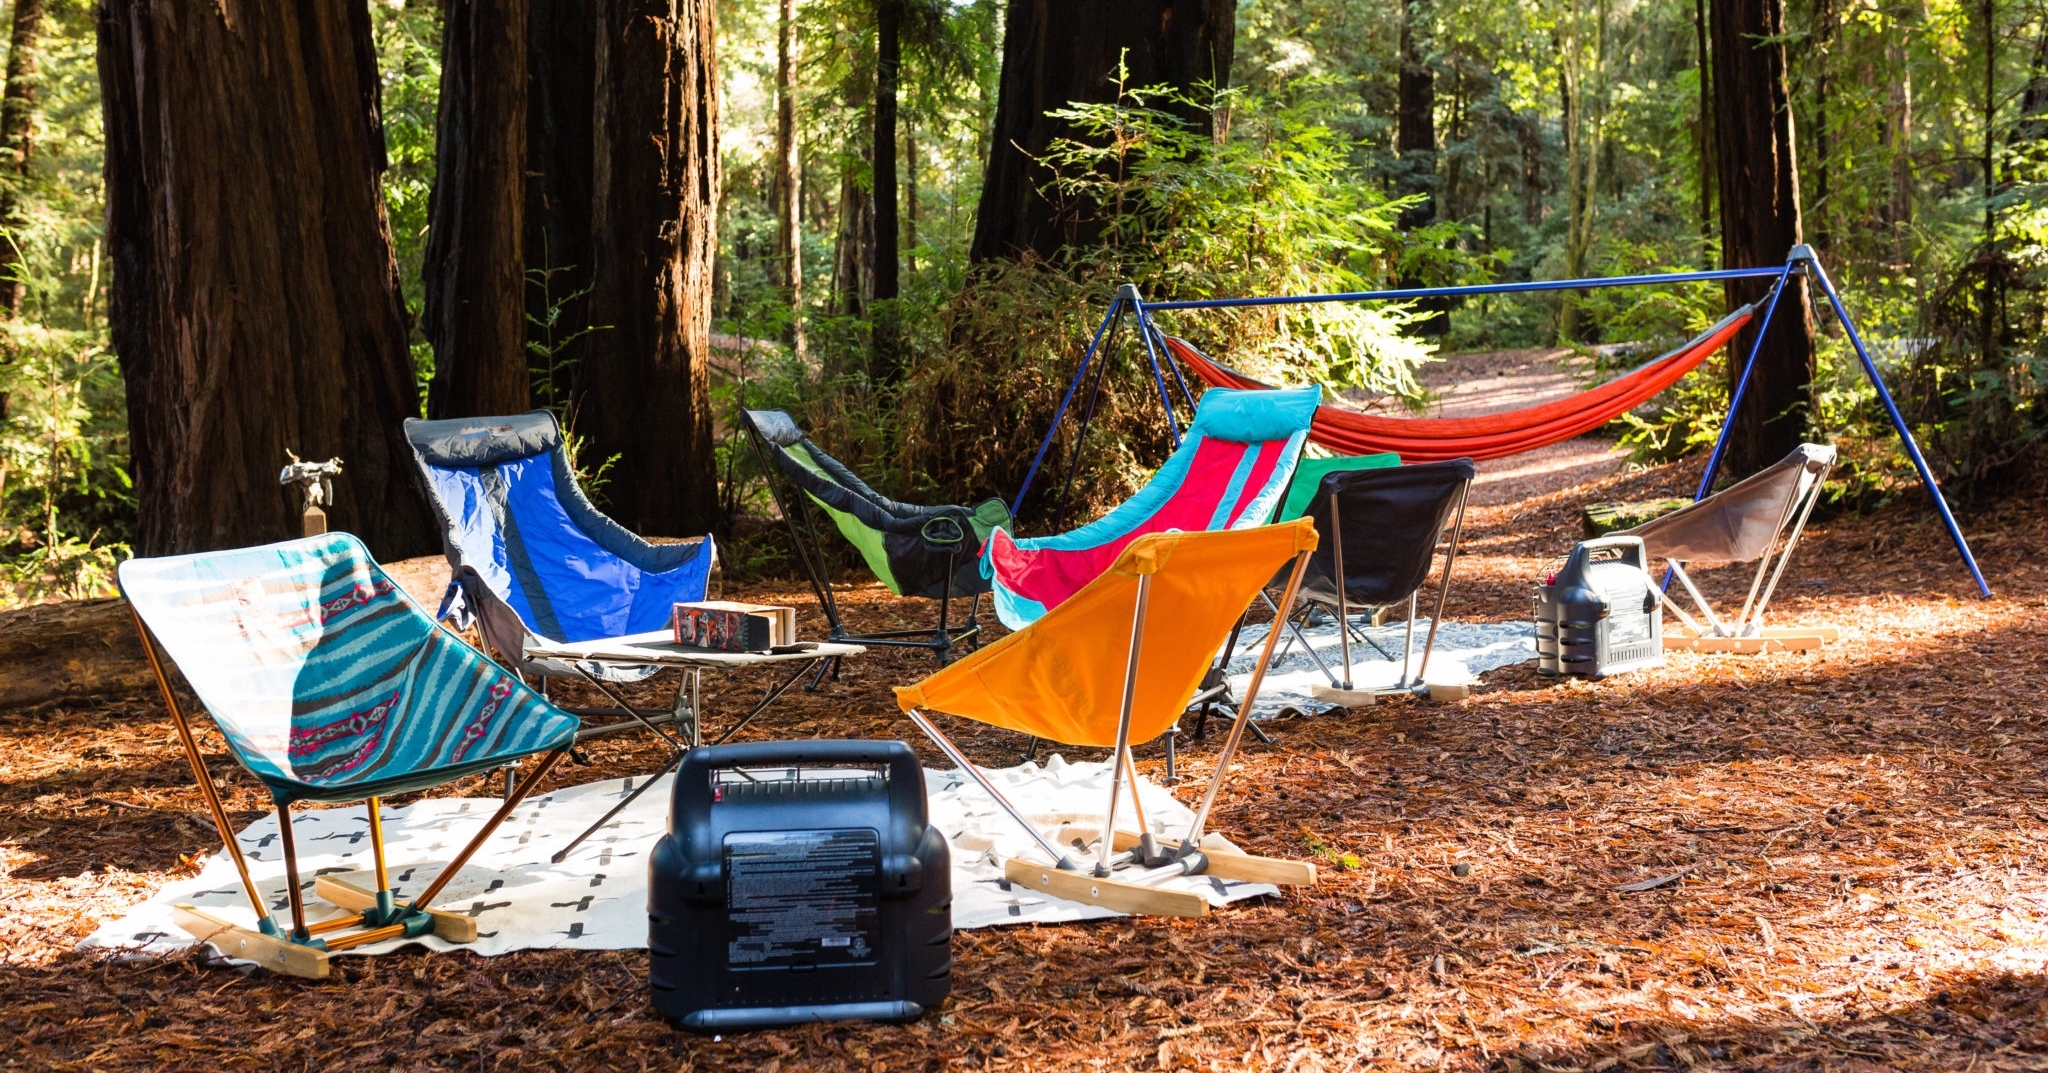 Space-Saving Solutions: Innovative Camping Furniture for Small Campsites